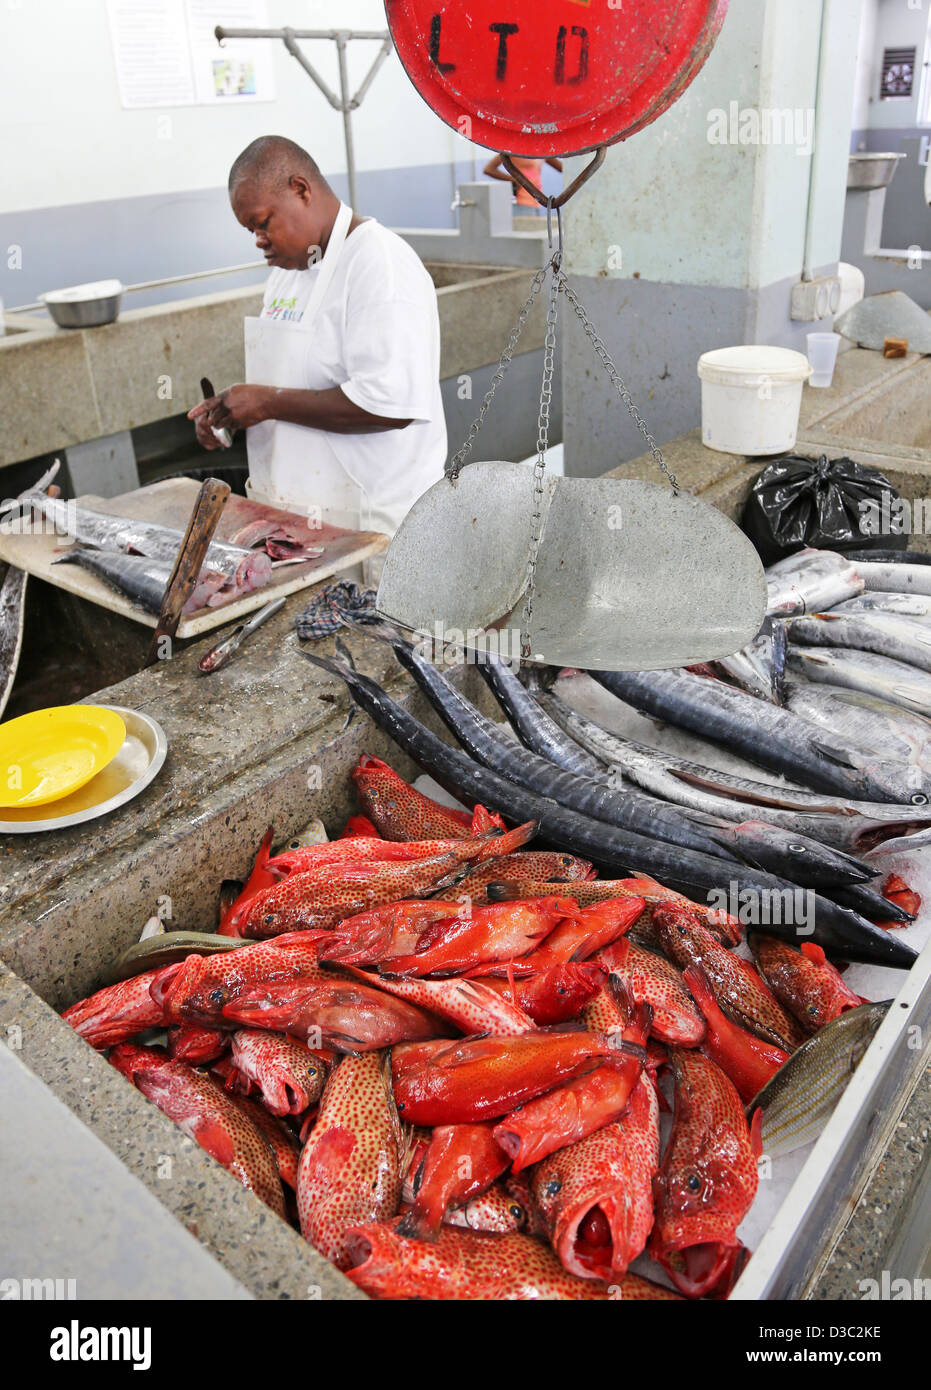 RED SNAPPER AND TUNA FISH,KINGSTON FISH MARKET,ST.VINCENT,CARIBBEAN Stock Photo